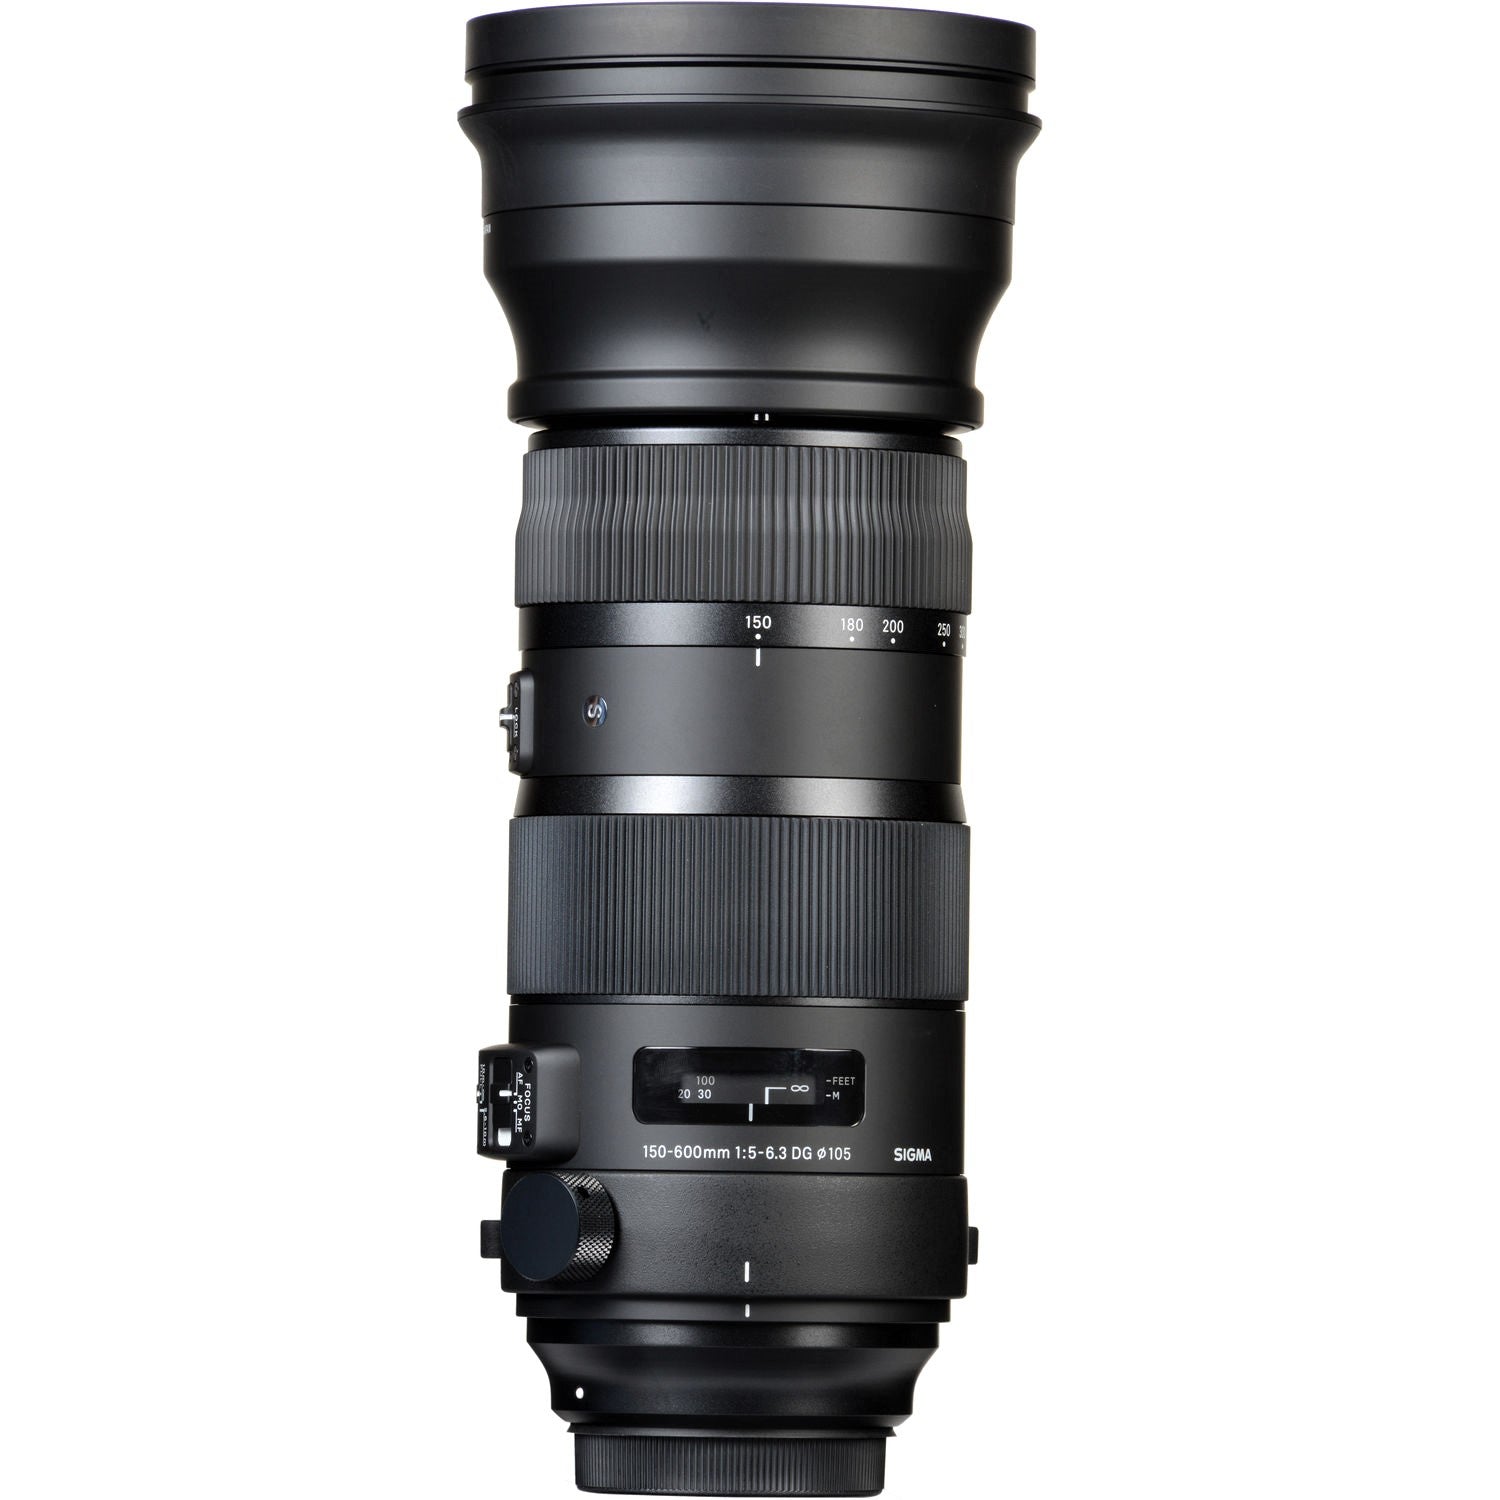 Sigma 150-600mm F5-6.3 DG OS HSM Sports Lens for Canon EF with Attached Lens Hood on the Top